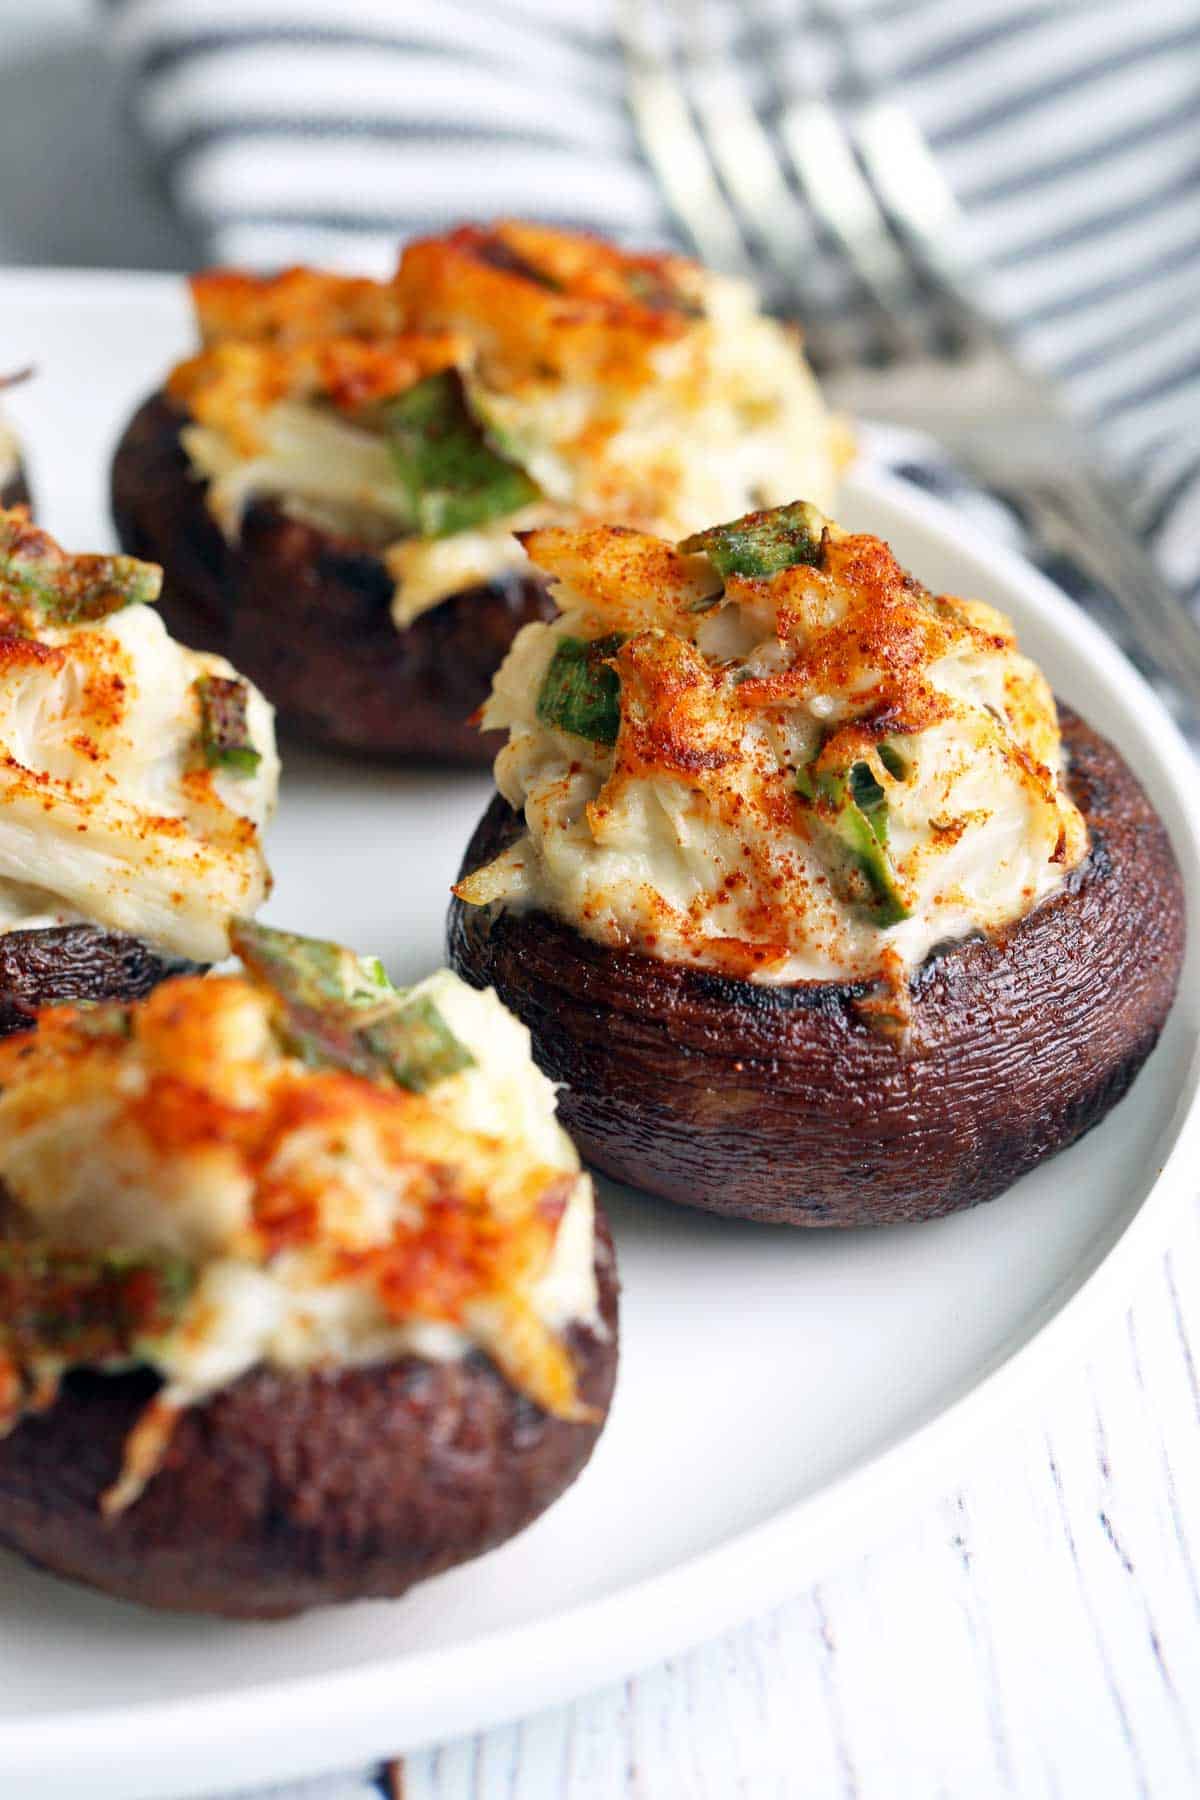 Crab Stuffed Mushrooms: Recipe, Tips, and Serving Suggestions